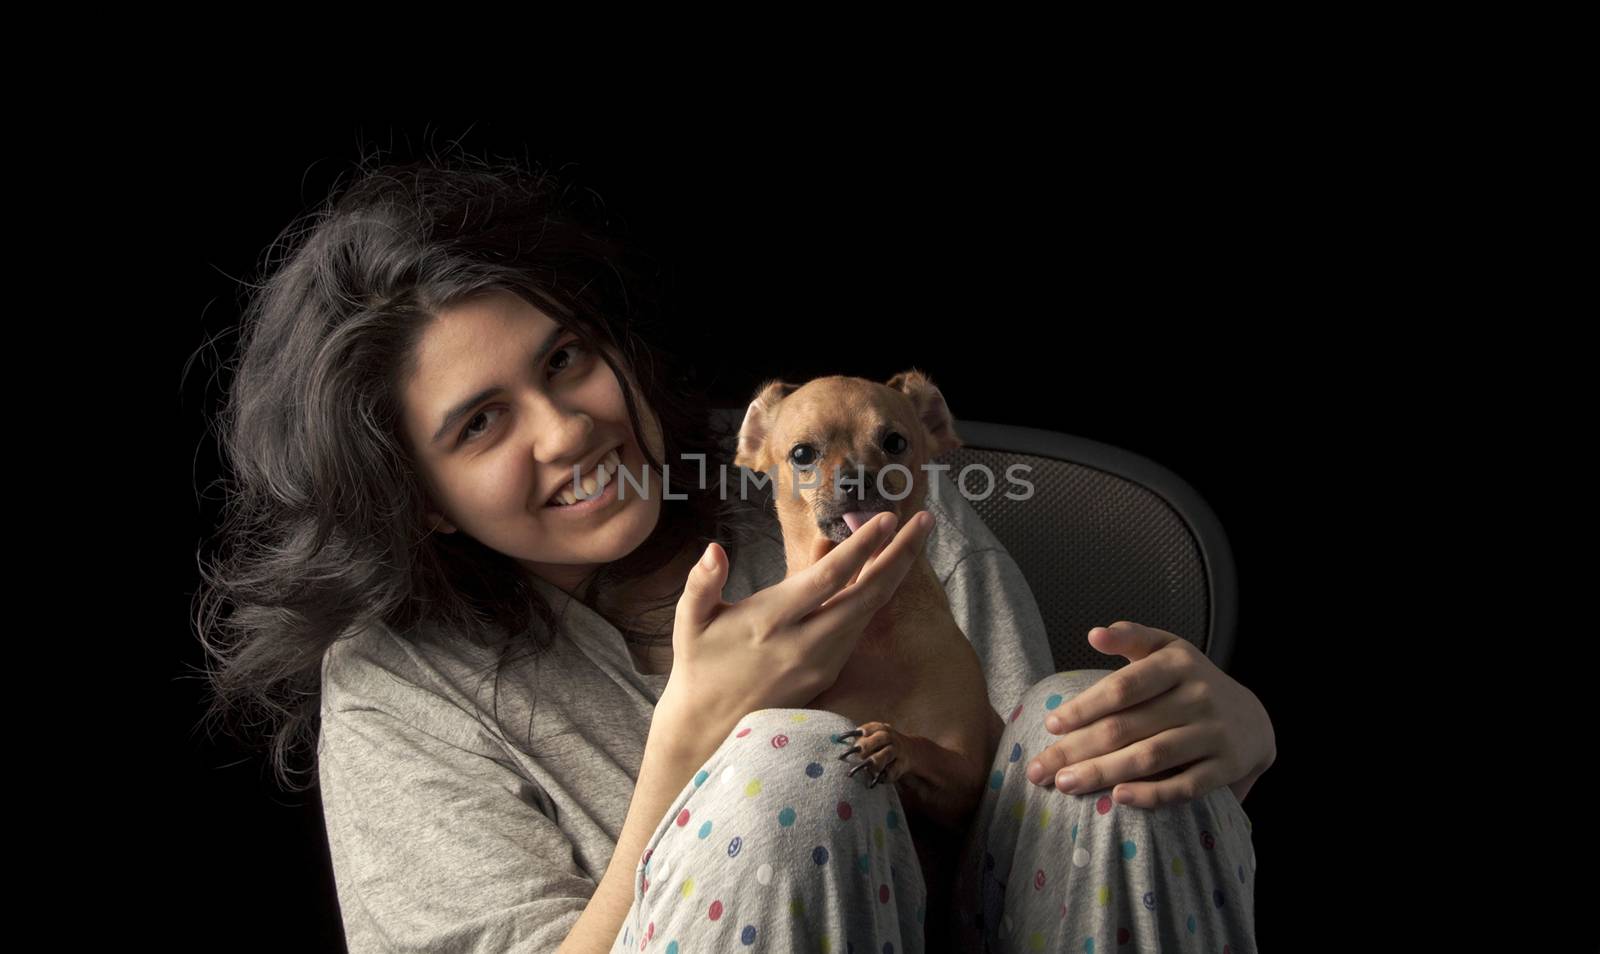 Low key shot of latina teenage girl holding her chihuahua dog and looking at the camera with a smile on her face; the dog's ears are curled back to create a funny appearance and the dog is licking her hand.